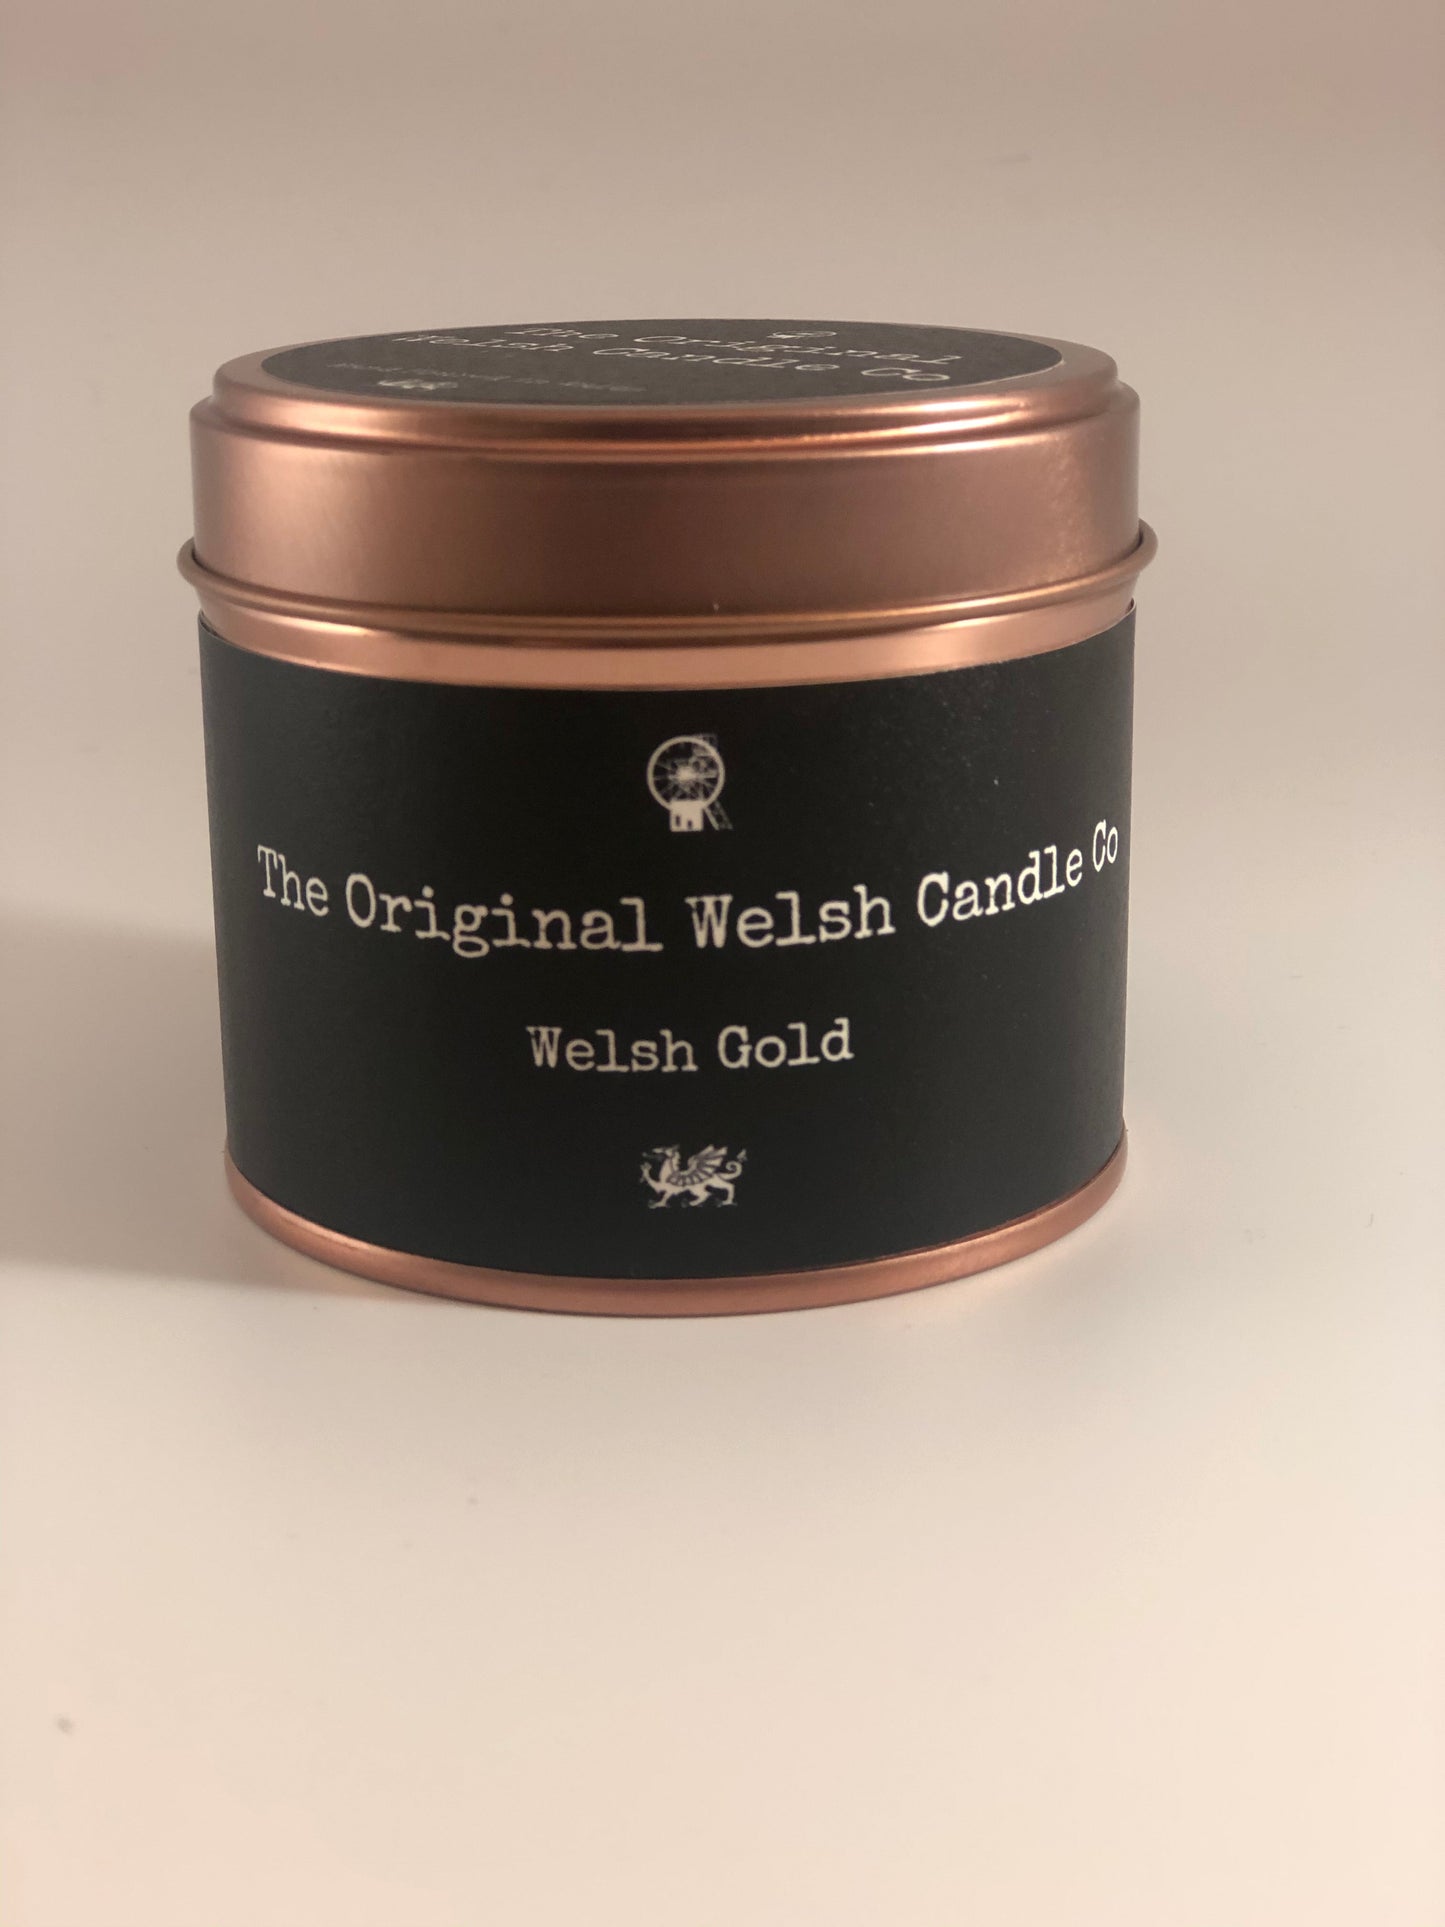 Welsh Gold Copper Tin soy candle scented with Honey & Tobacco